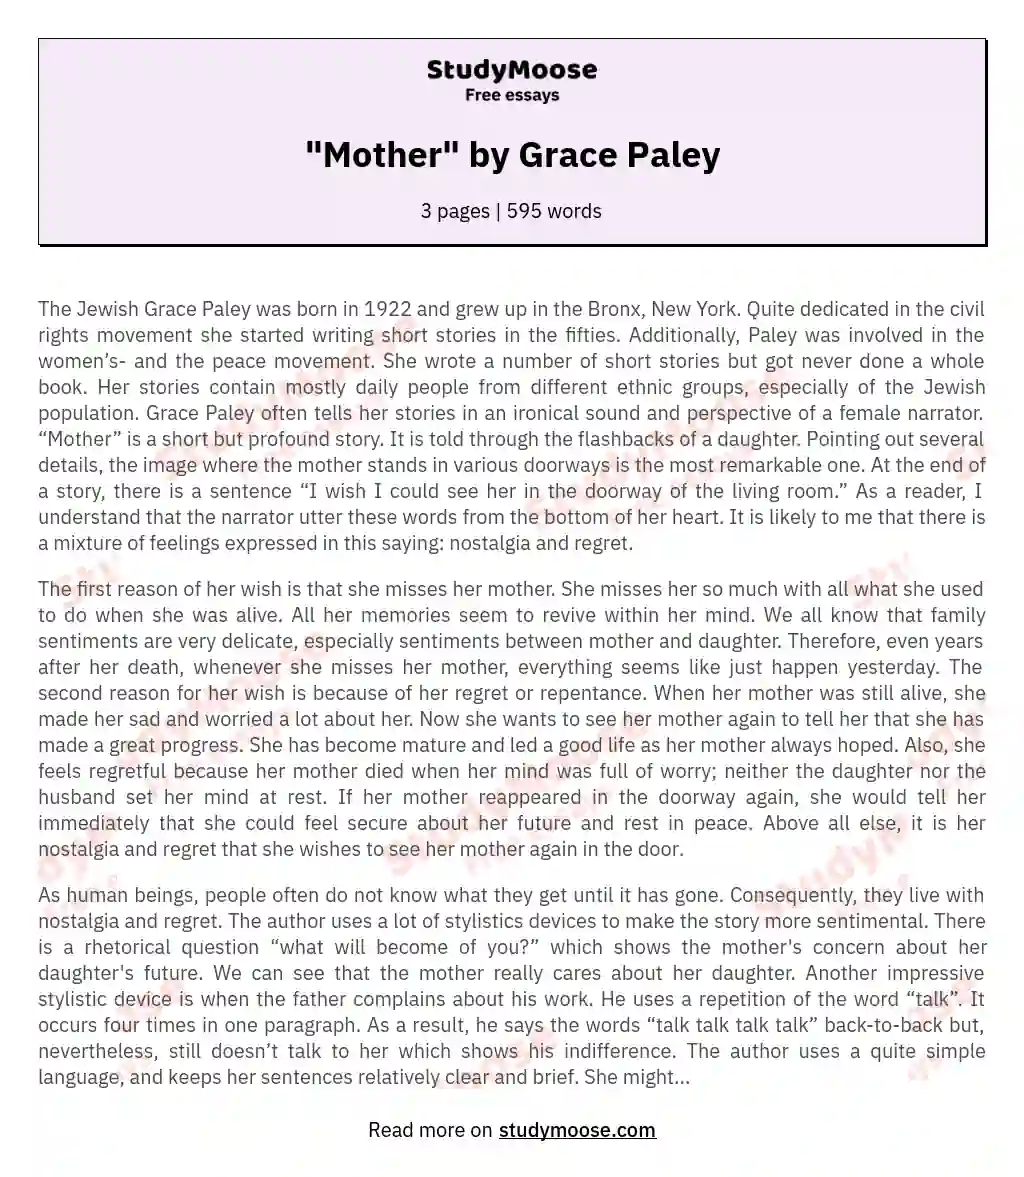 "Mother" by Grace Paley essay